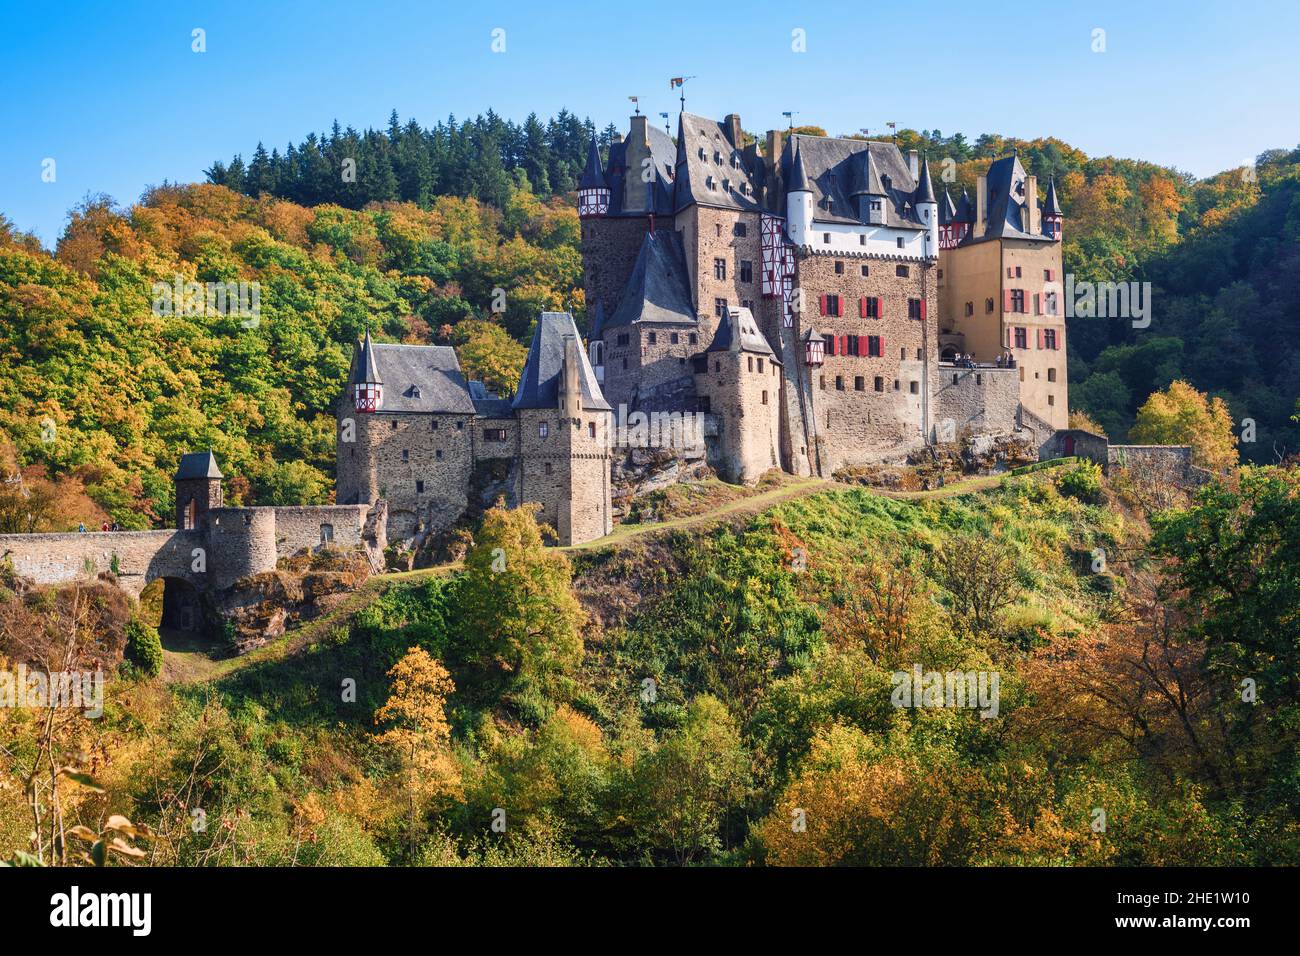 Historical Burg Eltz castle, Moselle river valley, Germany, in the bright autumn day light Stock Photo